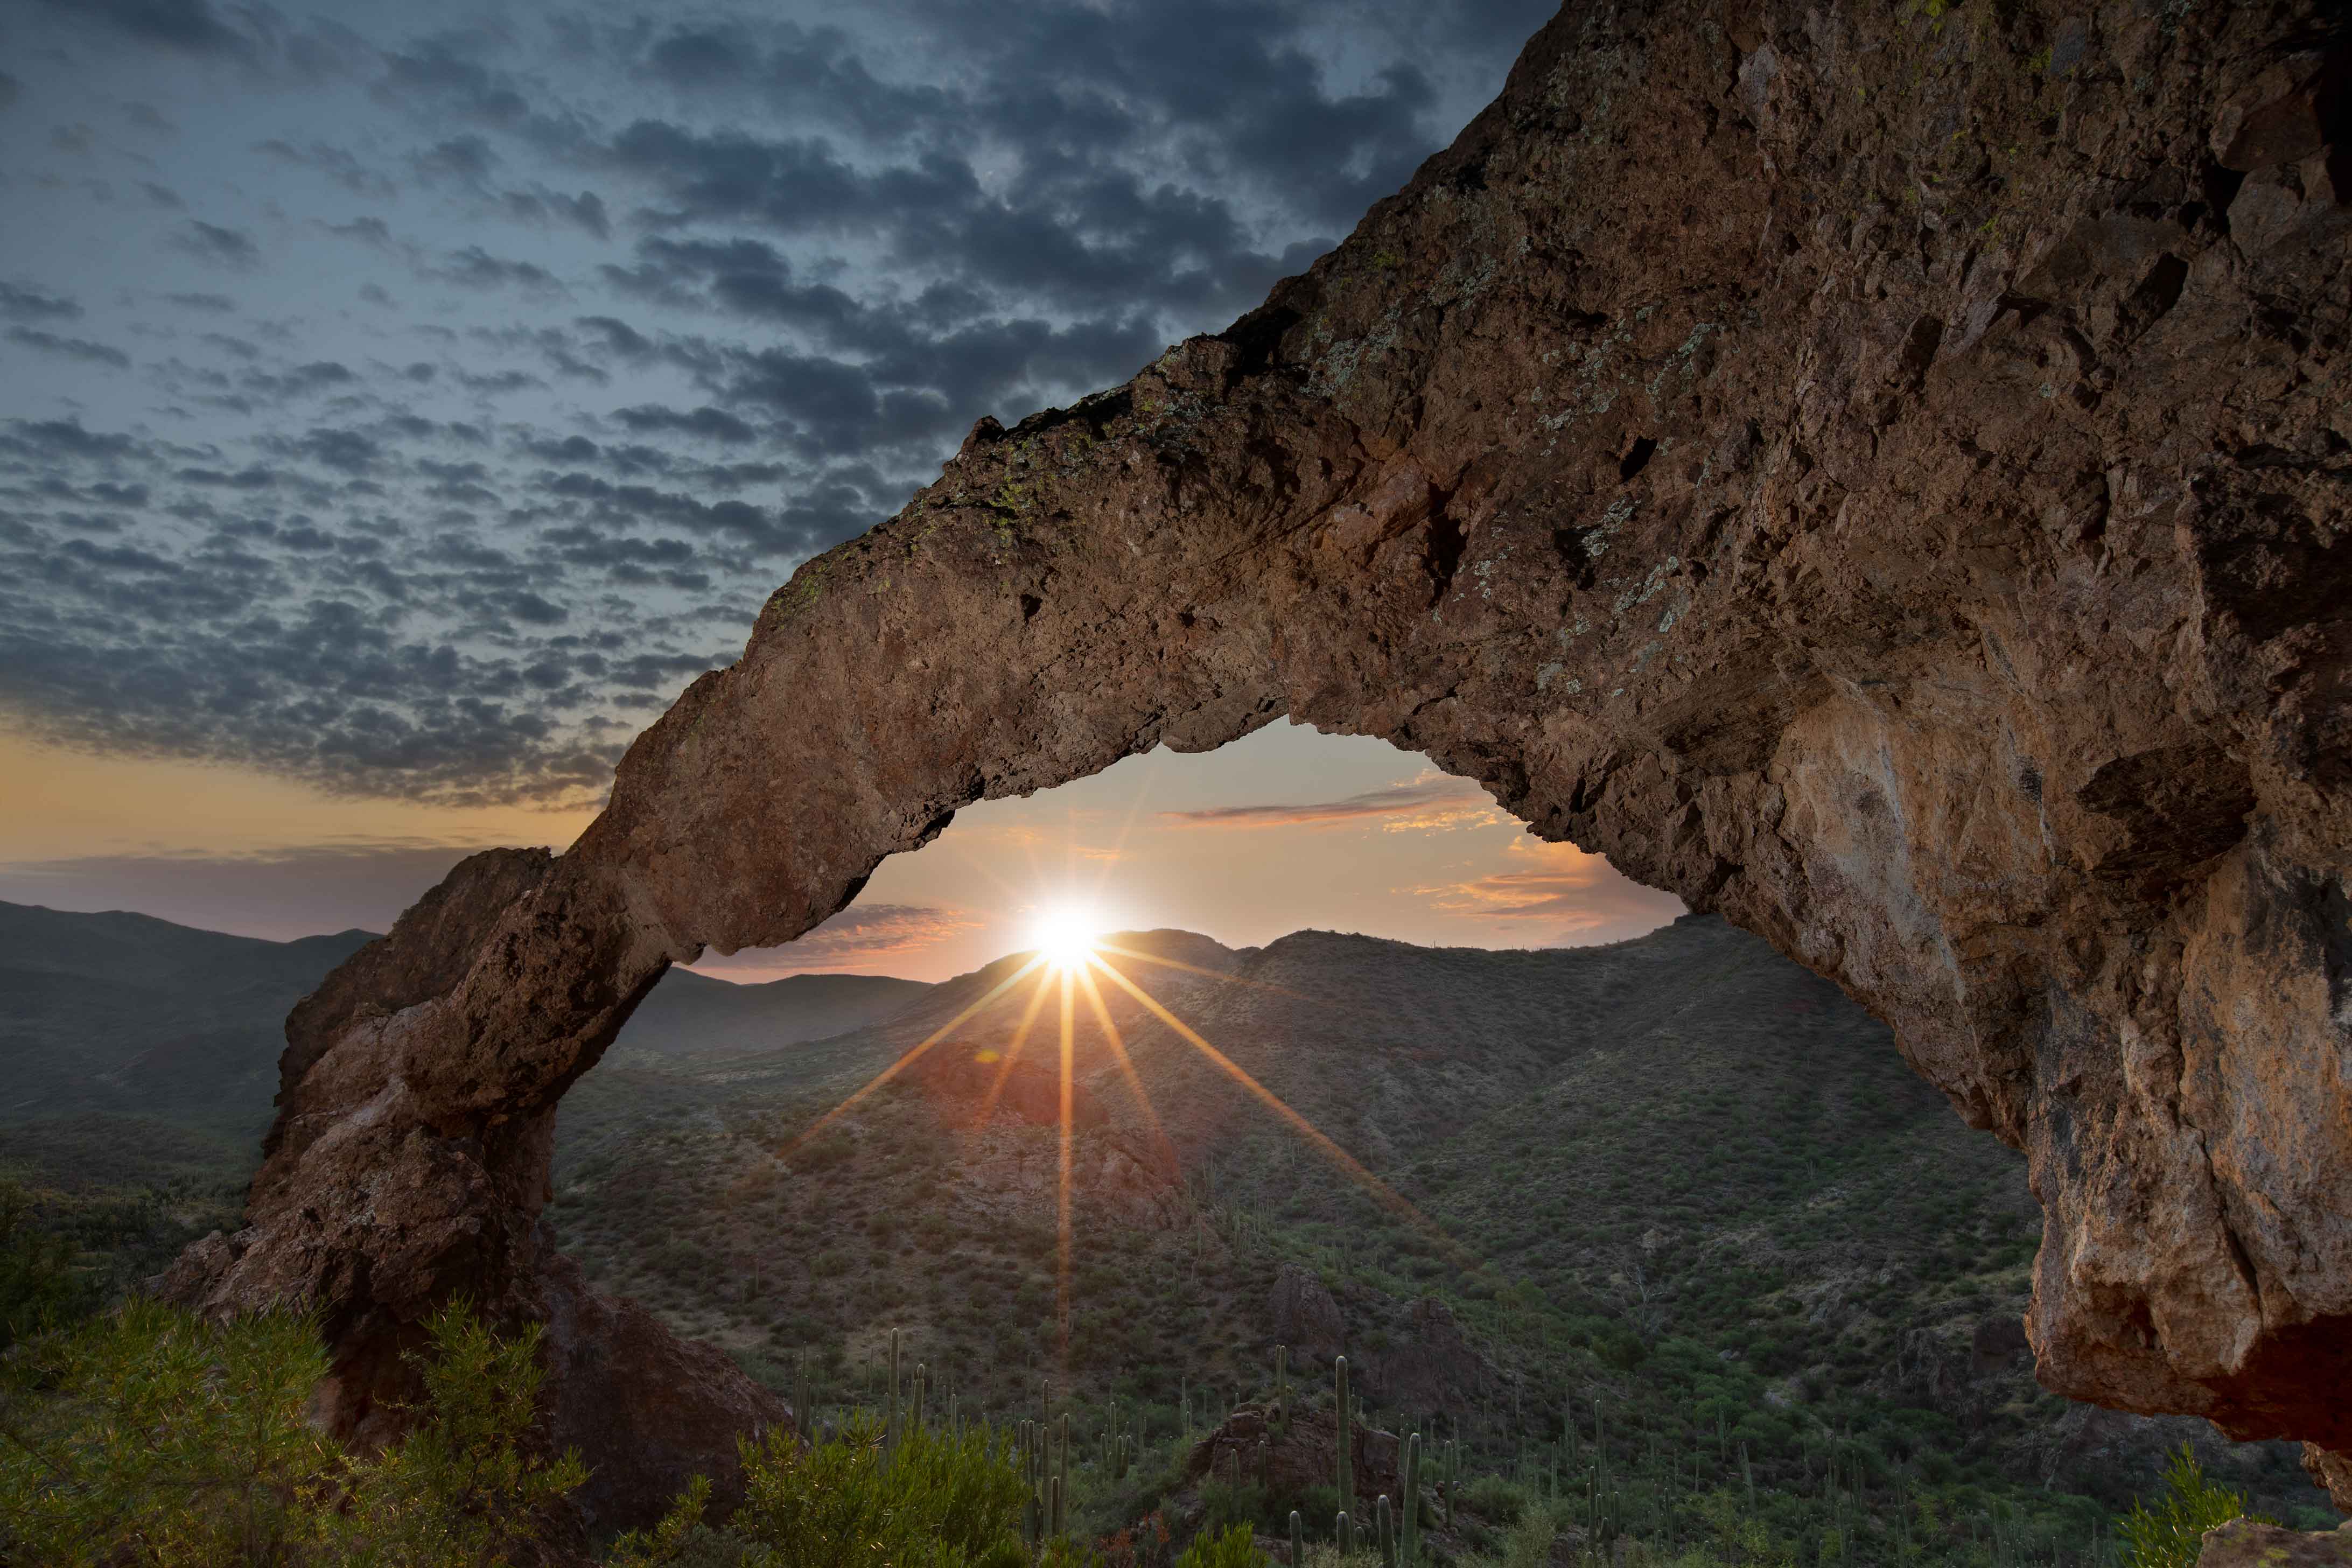 Sunrise at Elephant Arch in Hewitt Canyon in the Superstition Mts. of southern Arizona